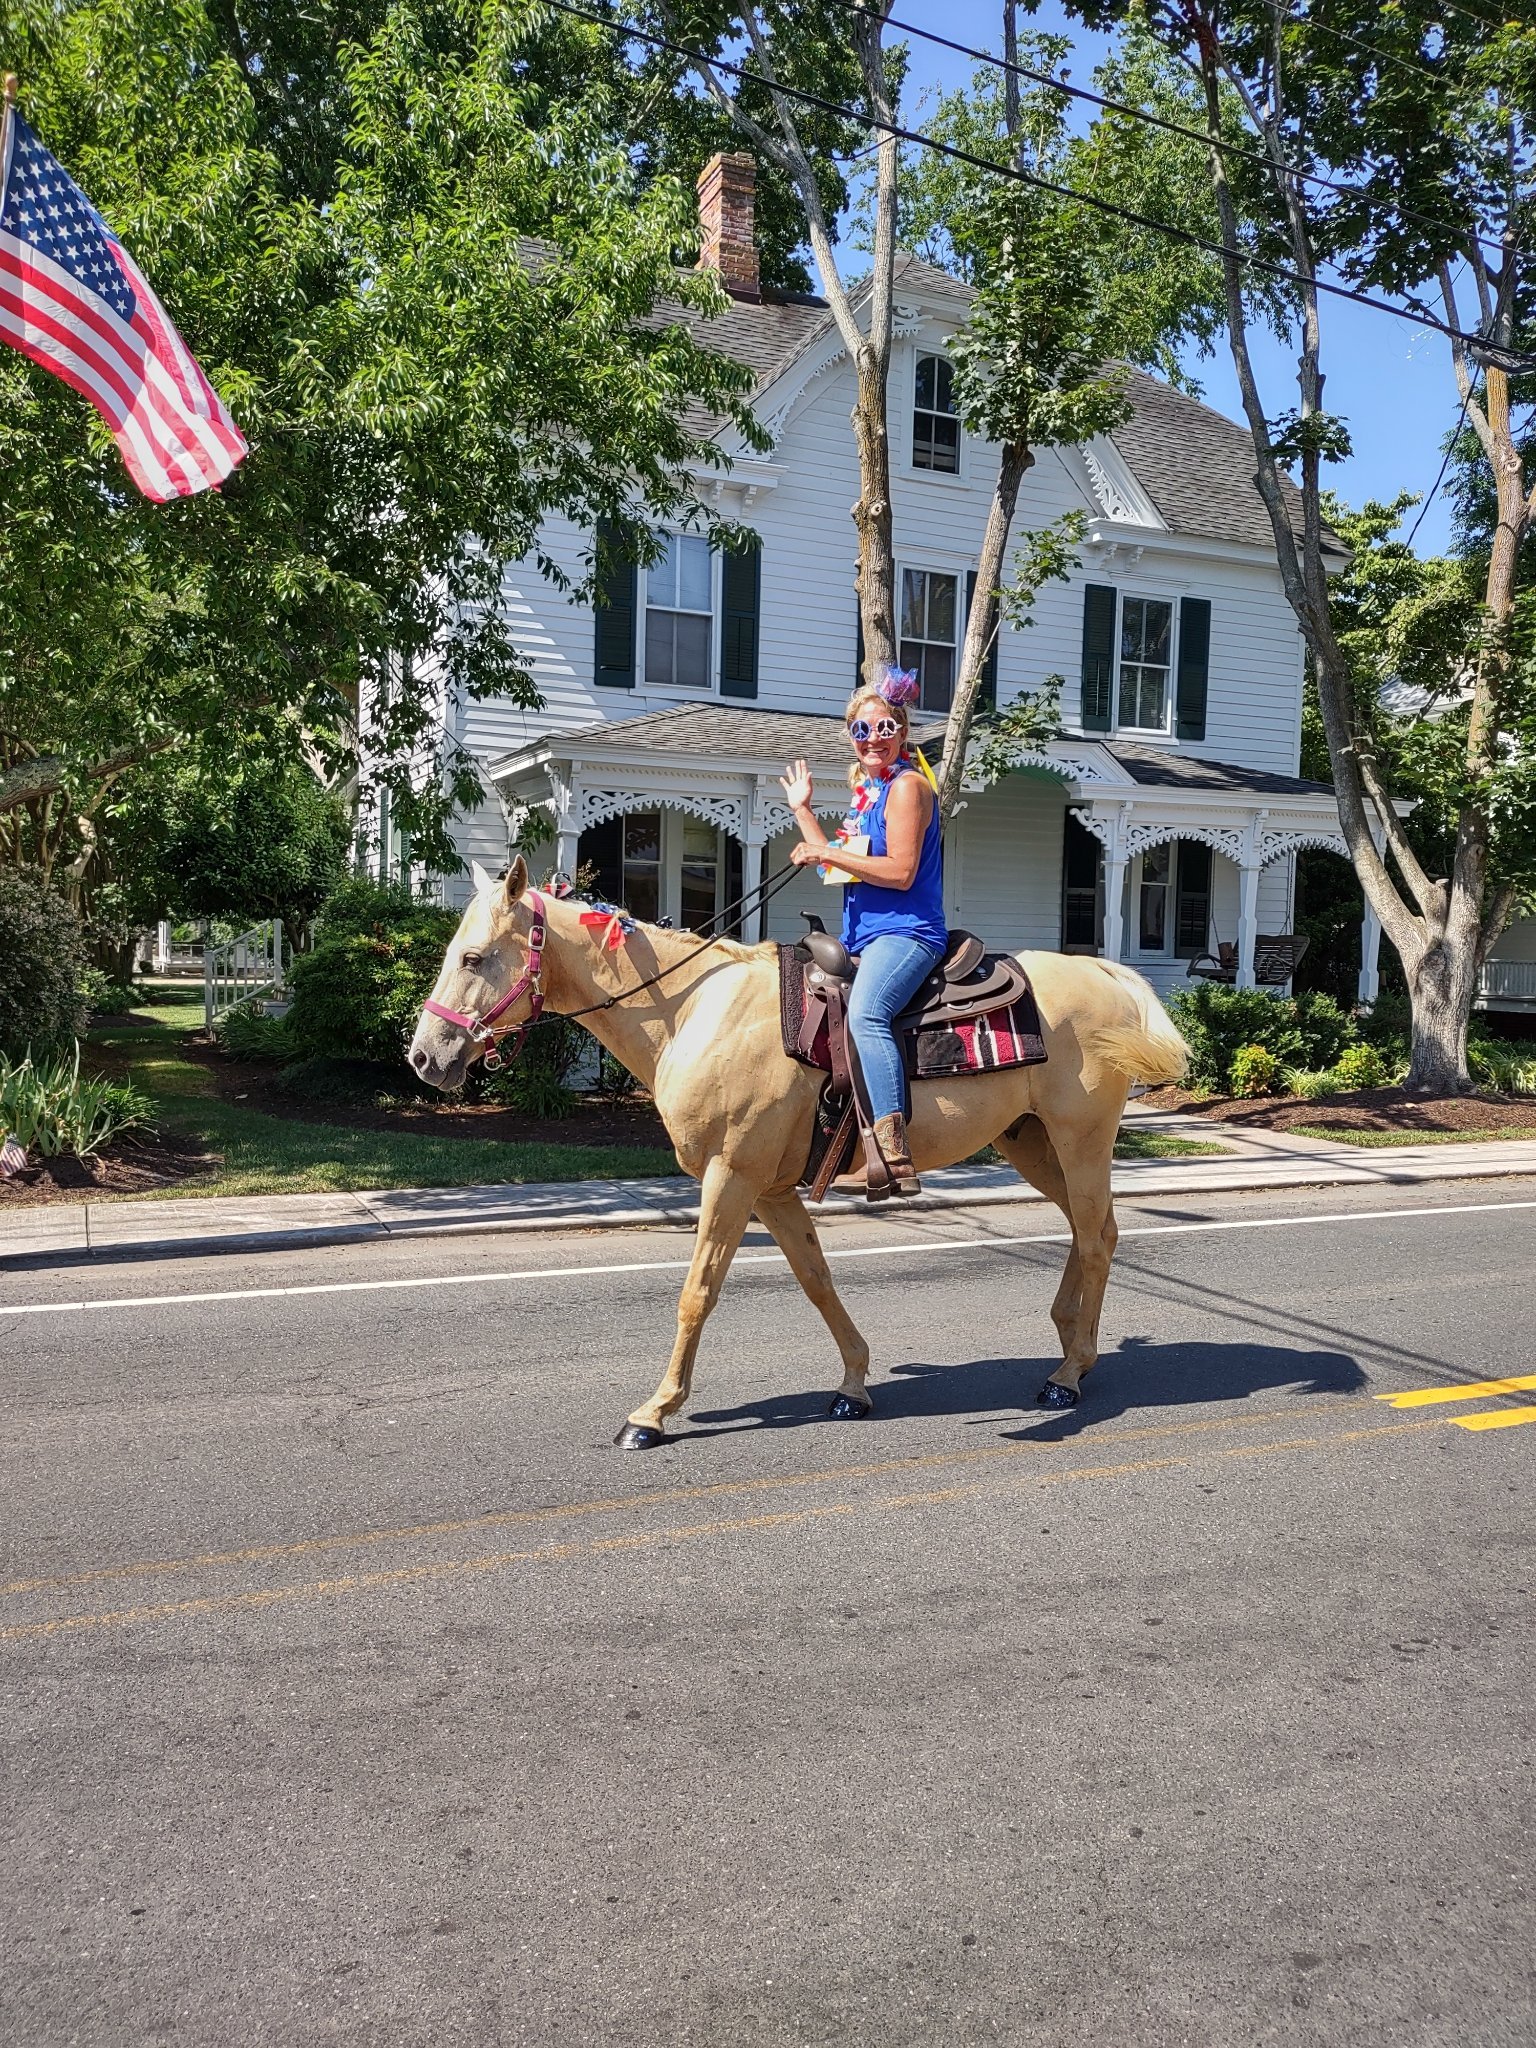 July 4th Light colored horse.jpg